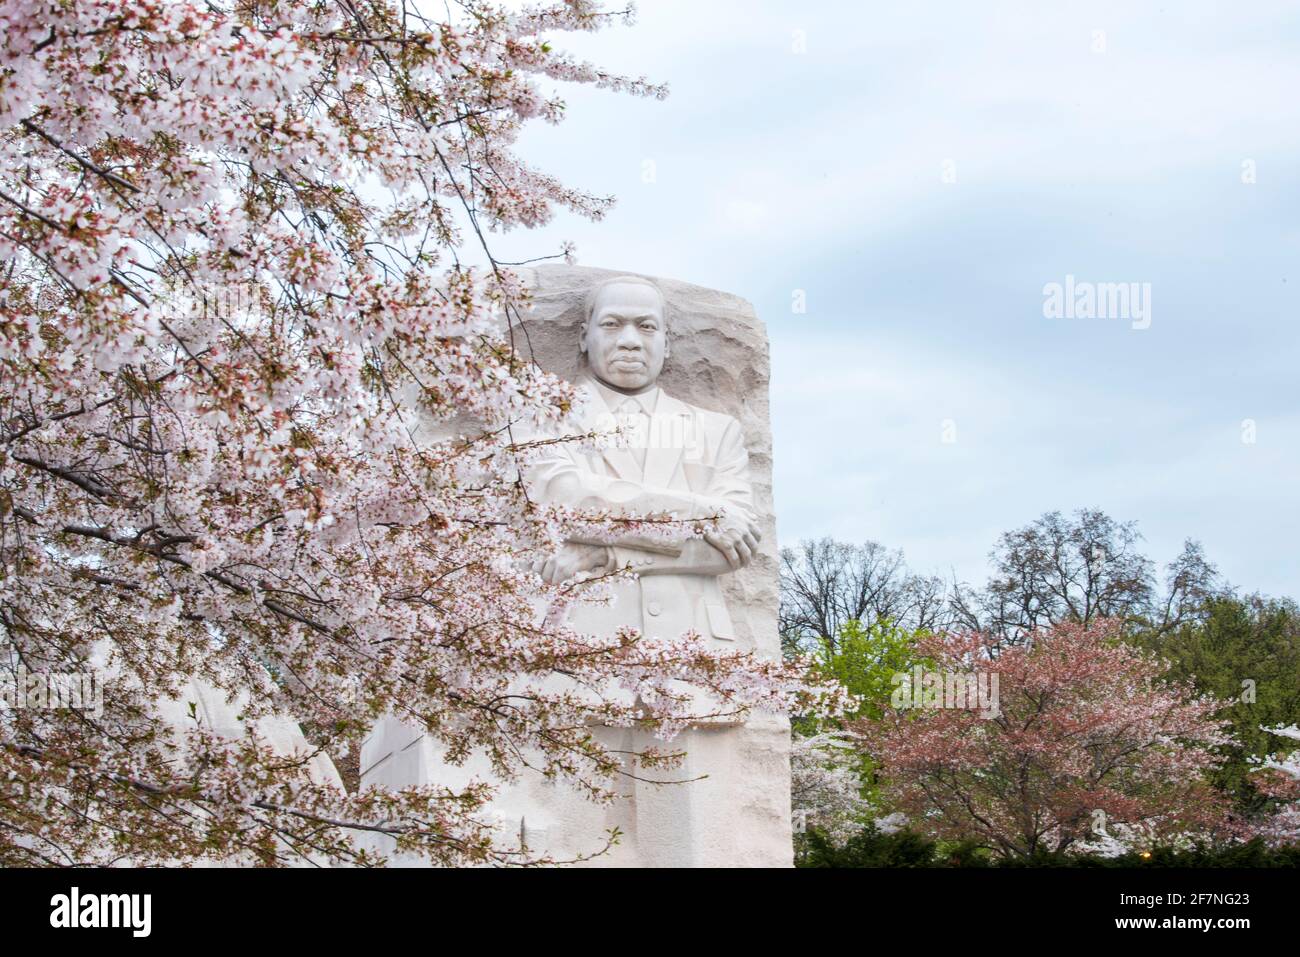 The likeness of Martin Luther King, Jr at the MLK Memorial in Washington, D.C.  is framed by the world famous cherry blossoms. Stock Photo